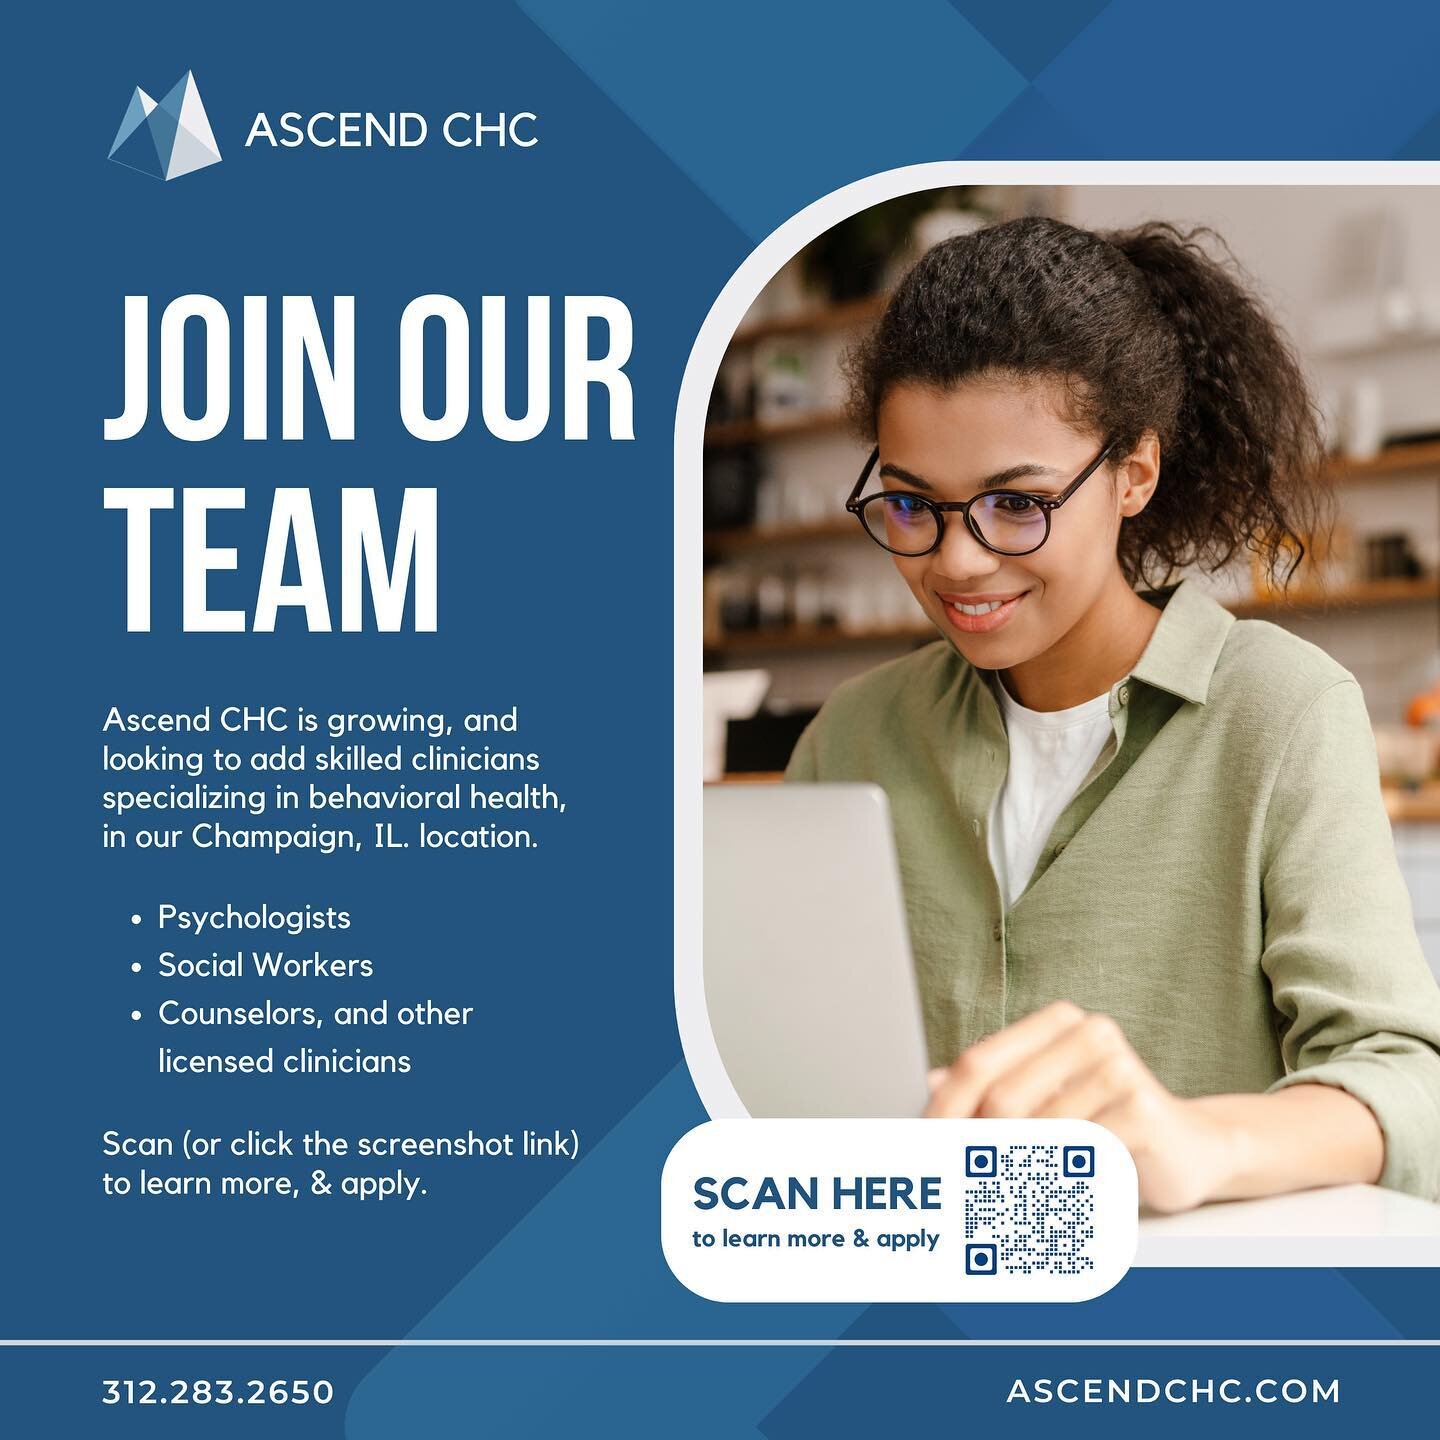 Join Our Team! Ascend is growing, and looking to add skilled clinicians specializing in behavioral health, in our Champaign, IL. location.

&bull; Psychologists
&bull; Social Workers
&bull; Counselors, and other
licensed clinicians

Scan (or click th